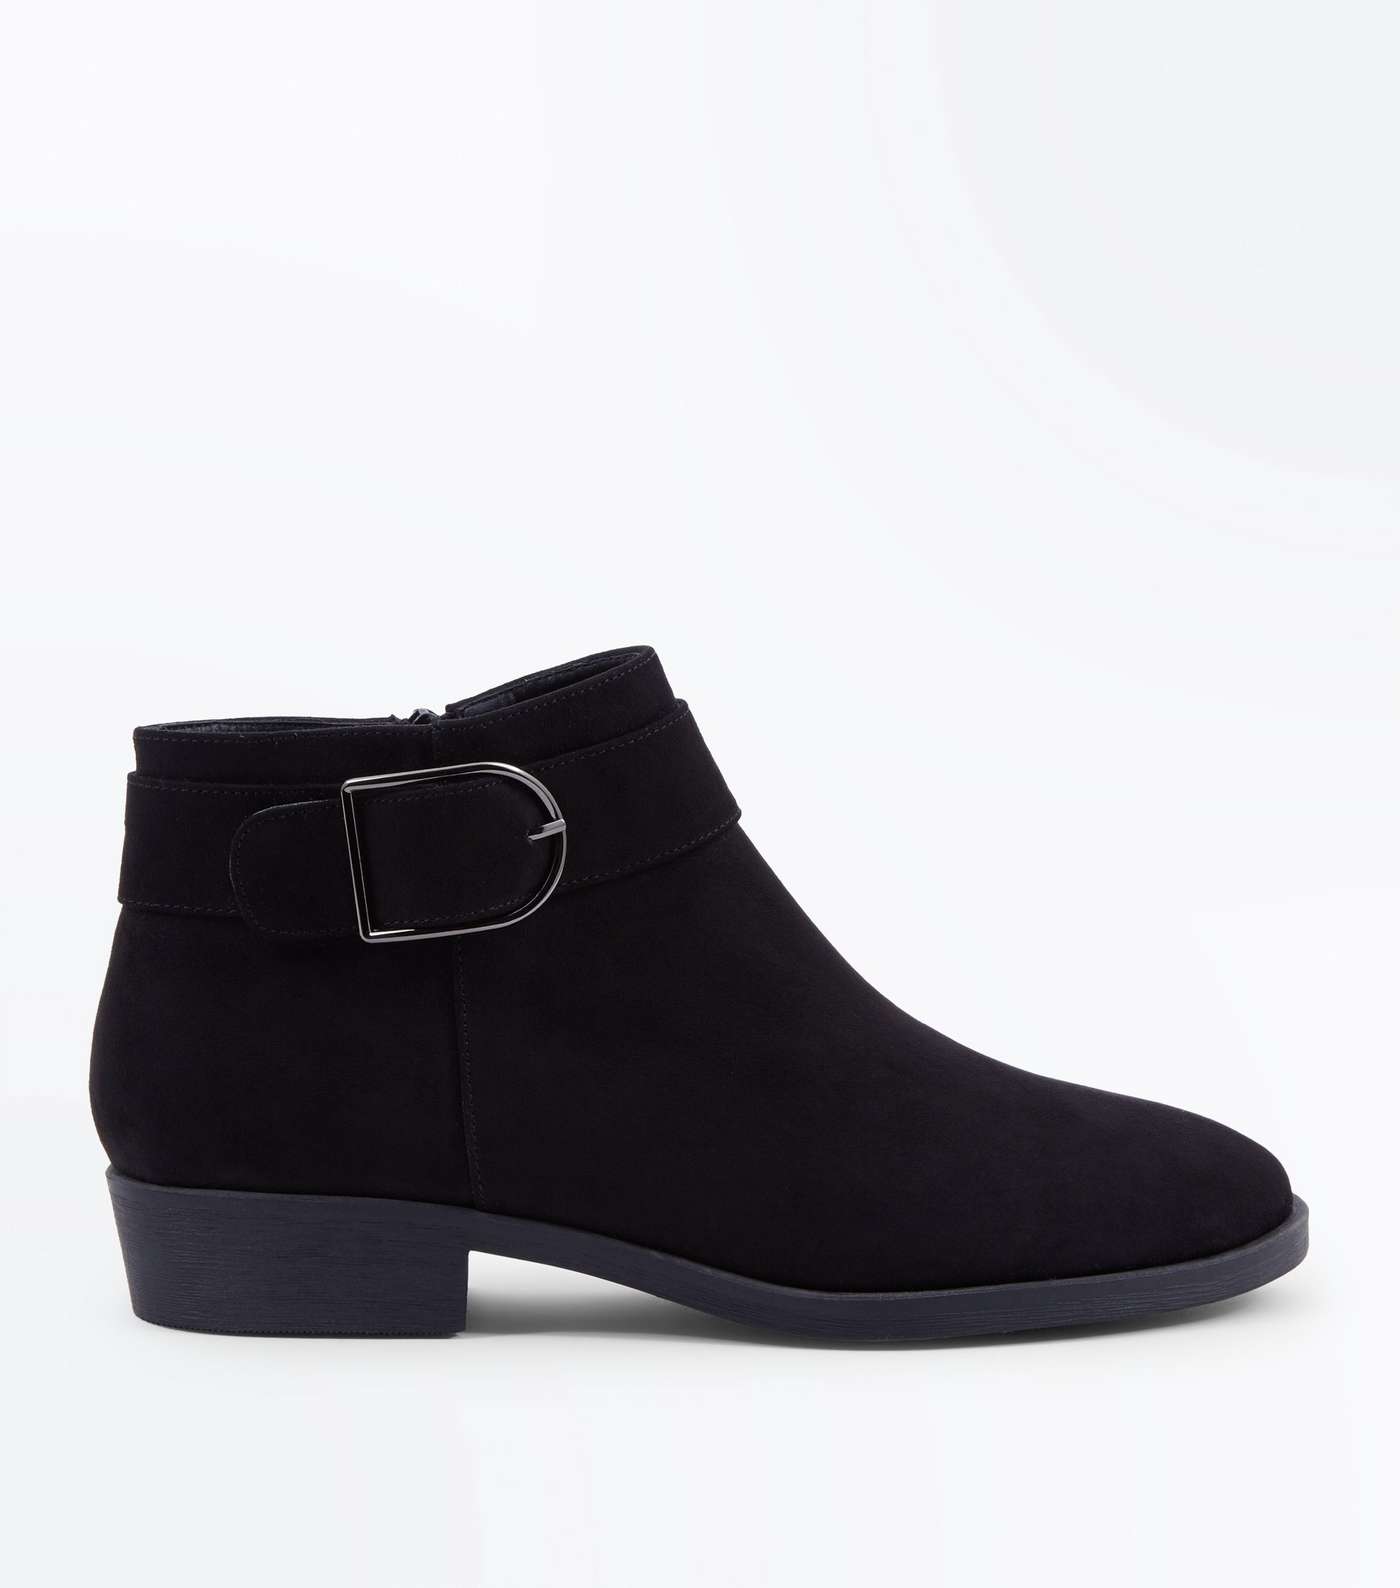 Black Suedette Buckle Strap Side Ankle Boots